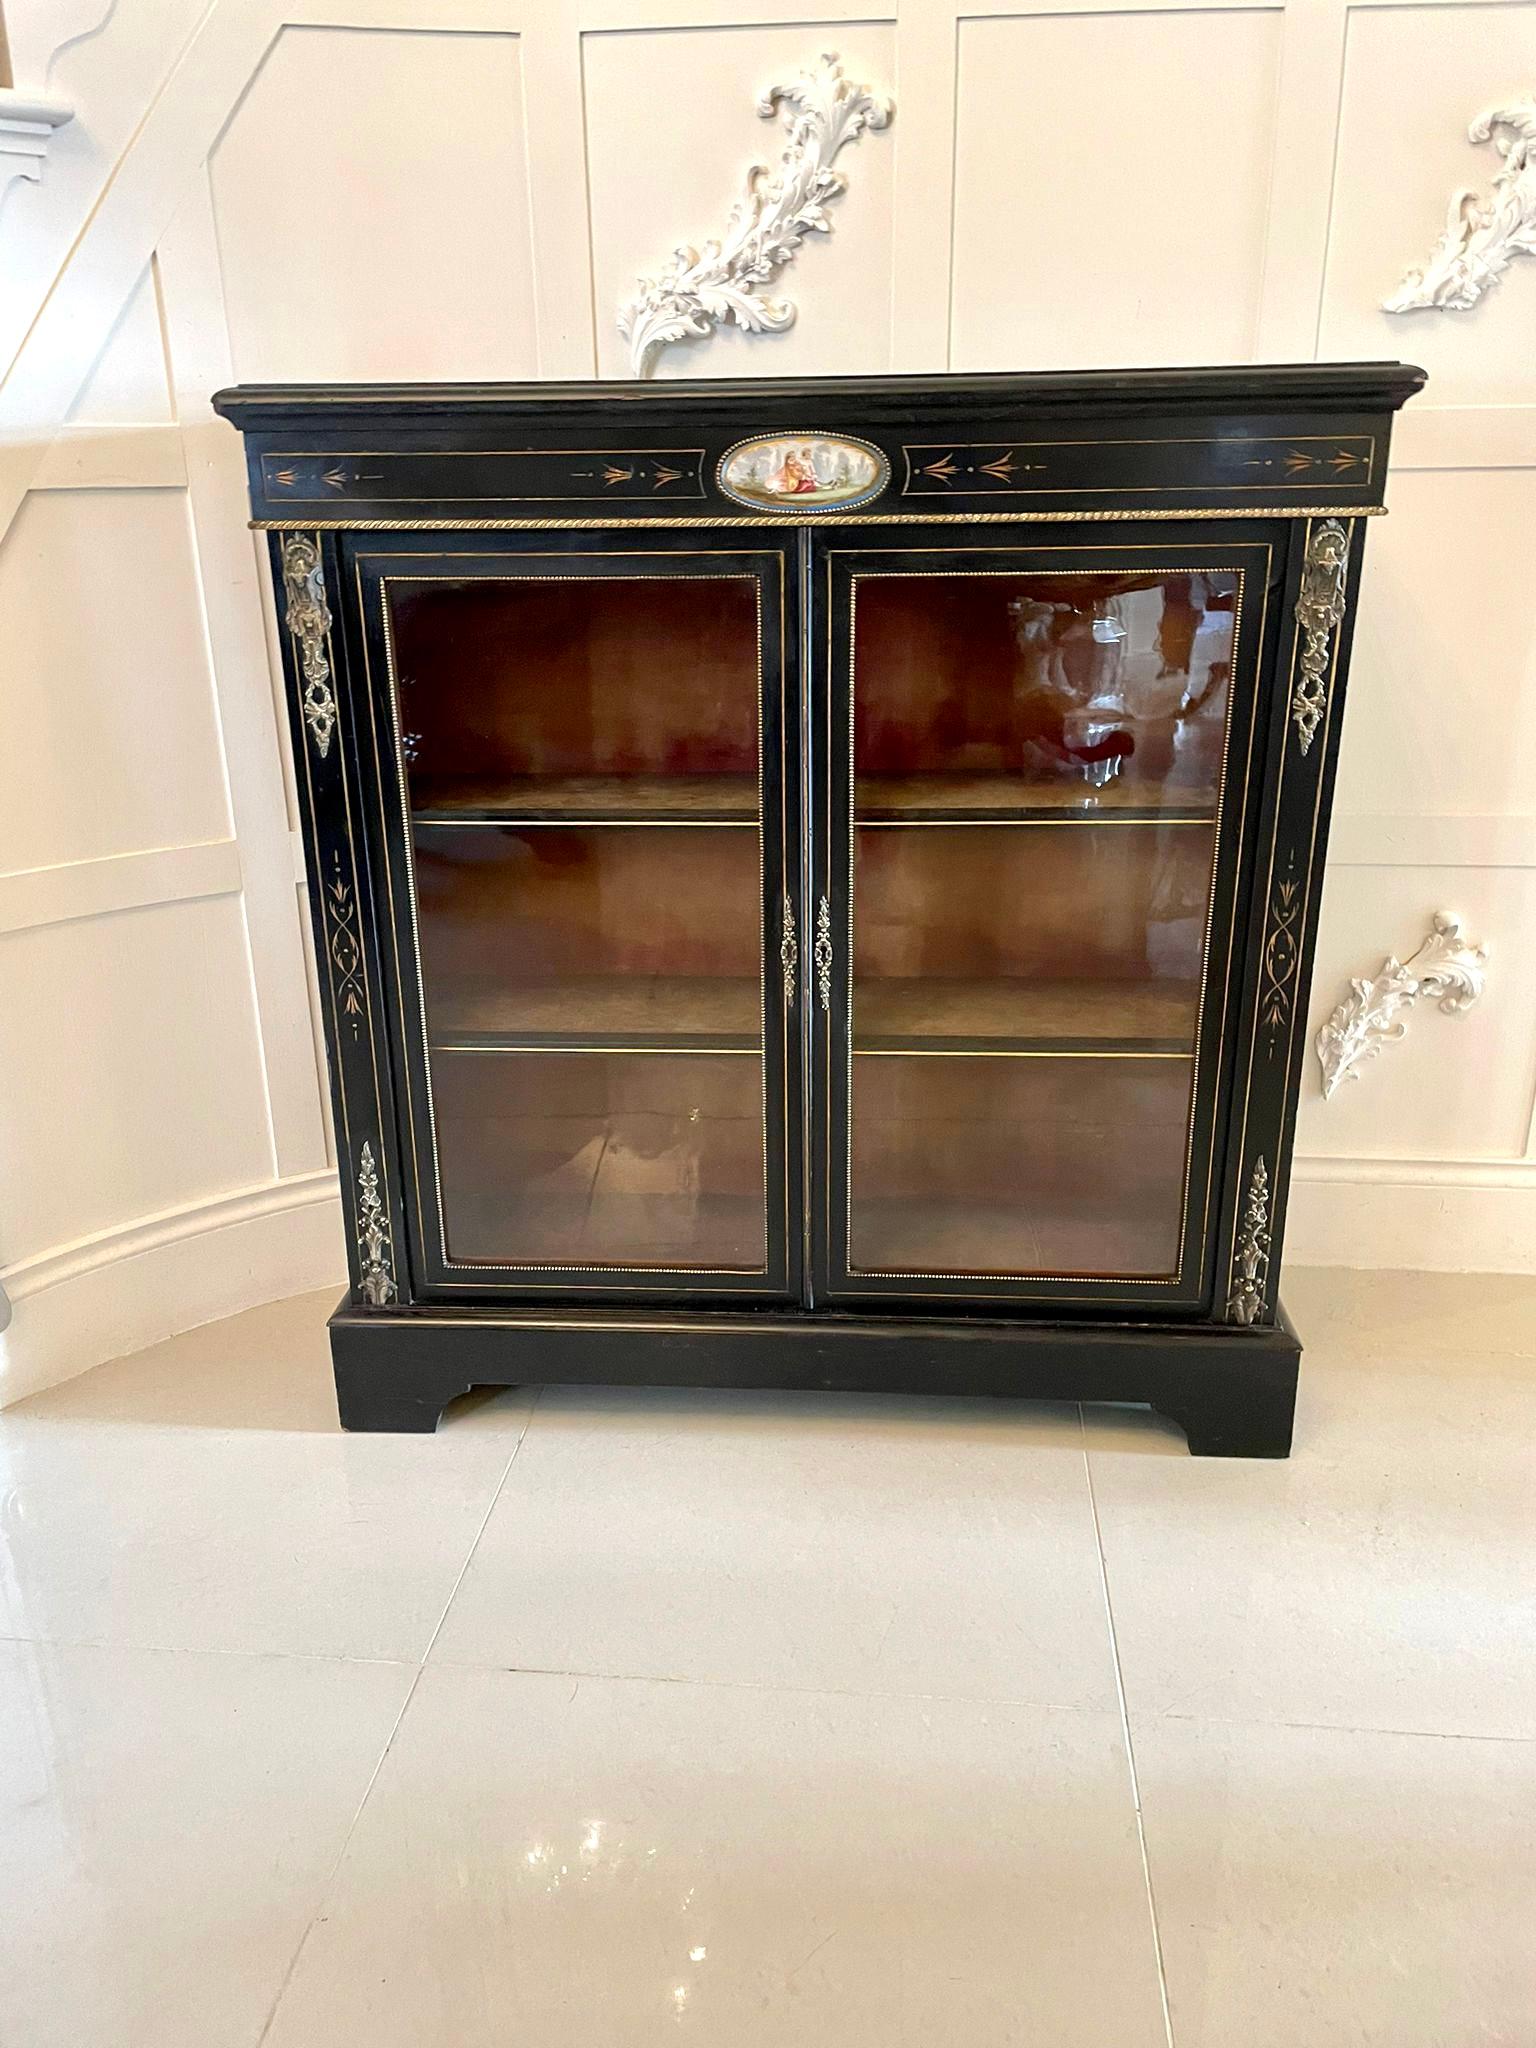  Antique Victorian French Ornate Ormolu Mounts Ebonised Display Cabinet In Good Condition For Sale In Suffolk, GB